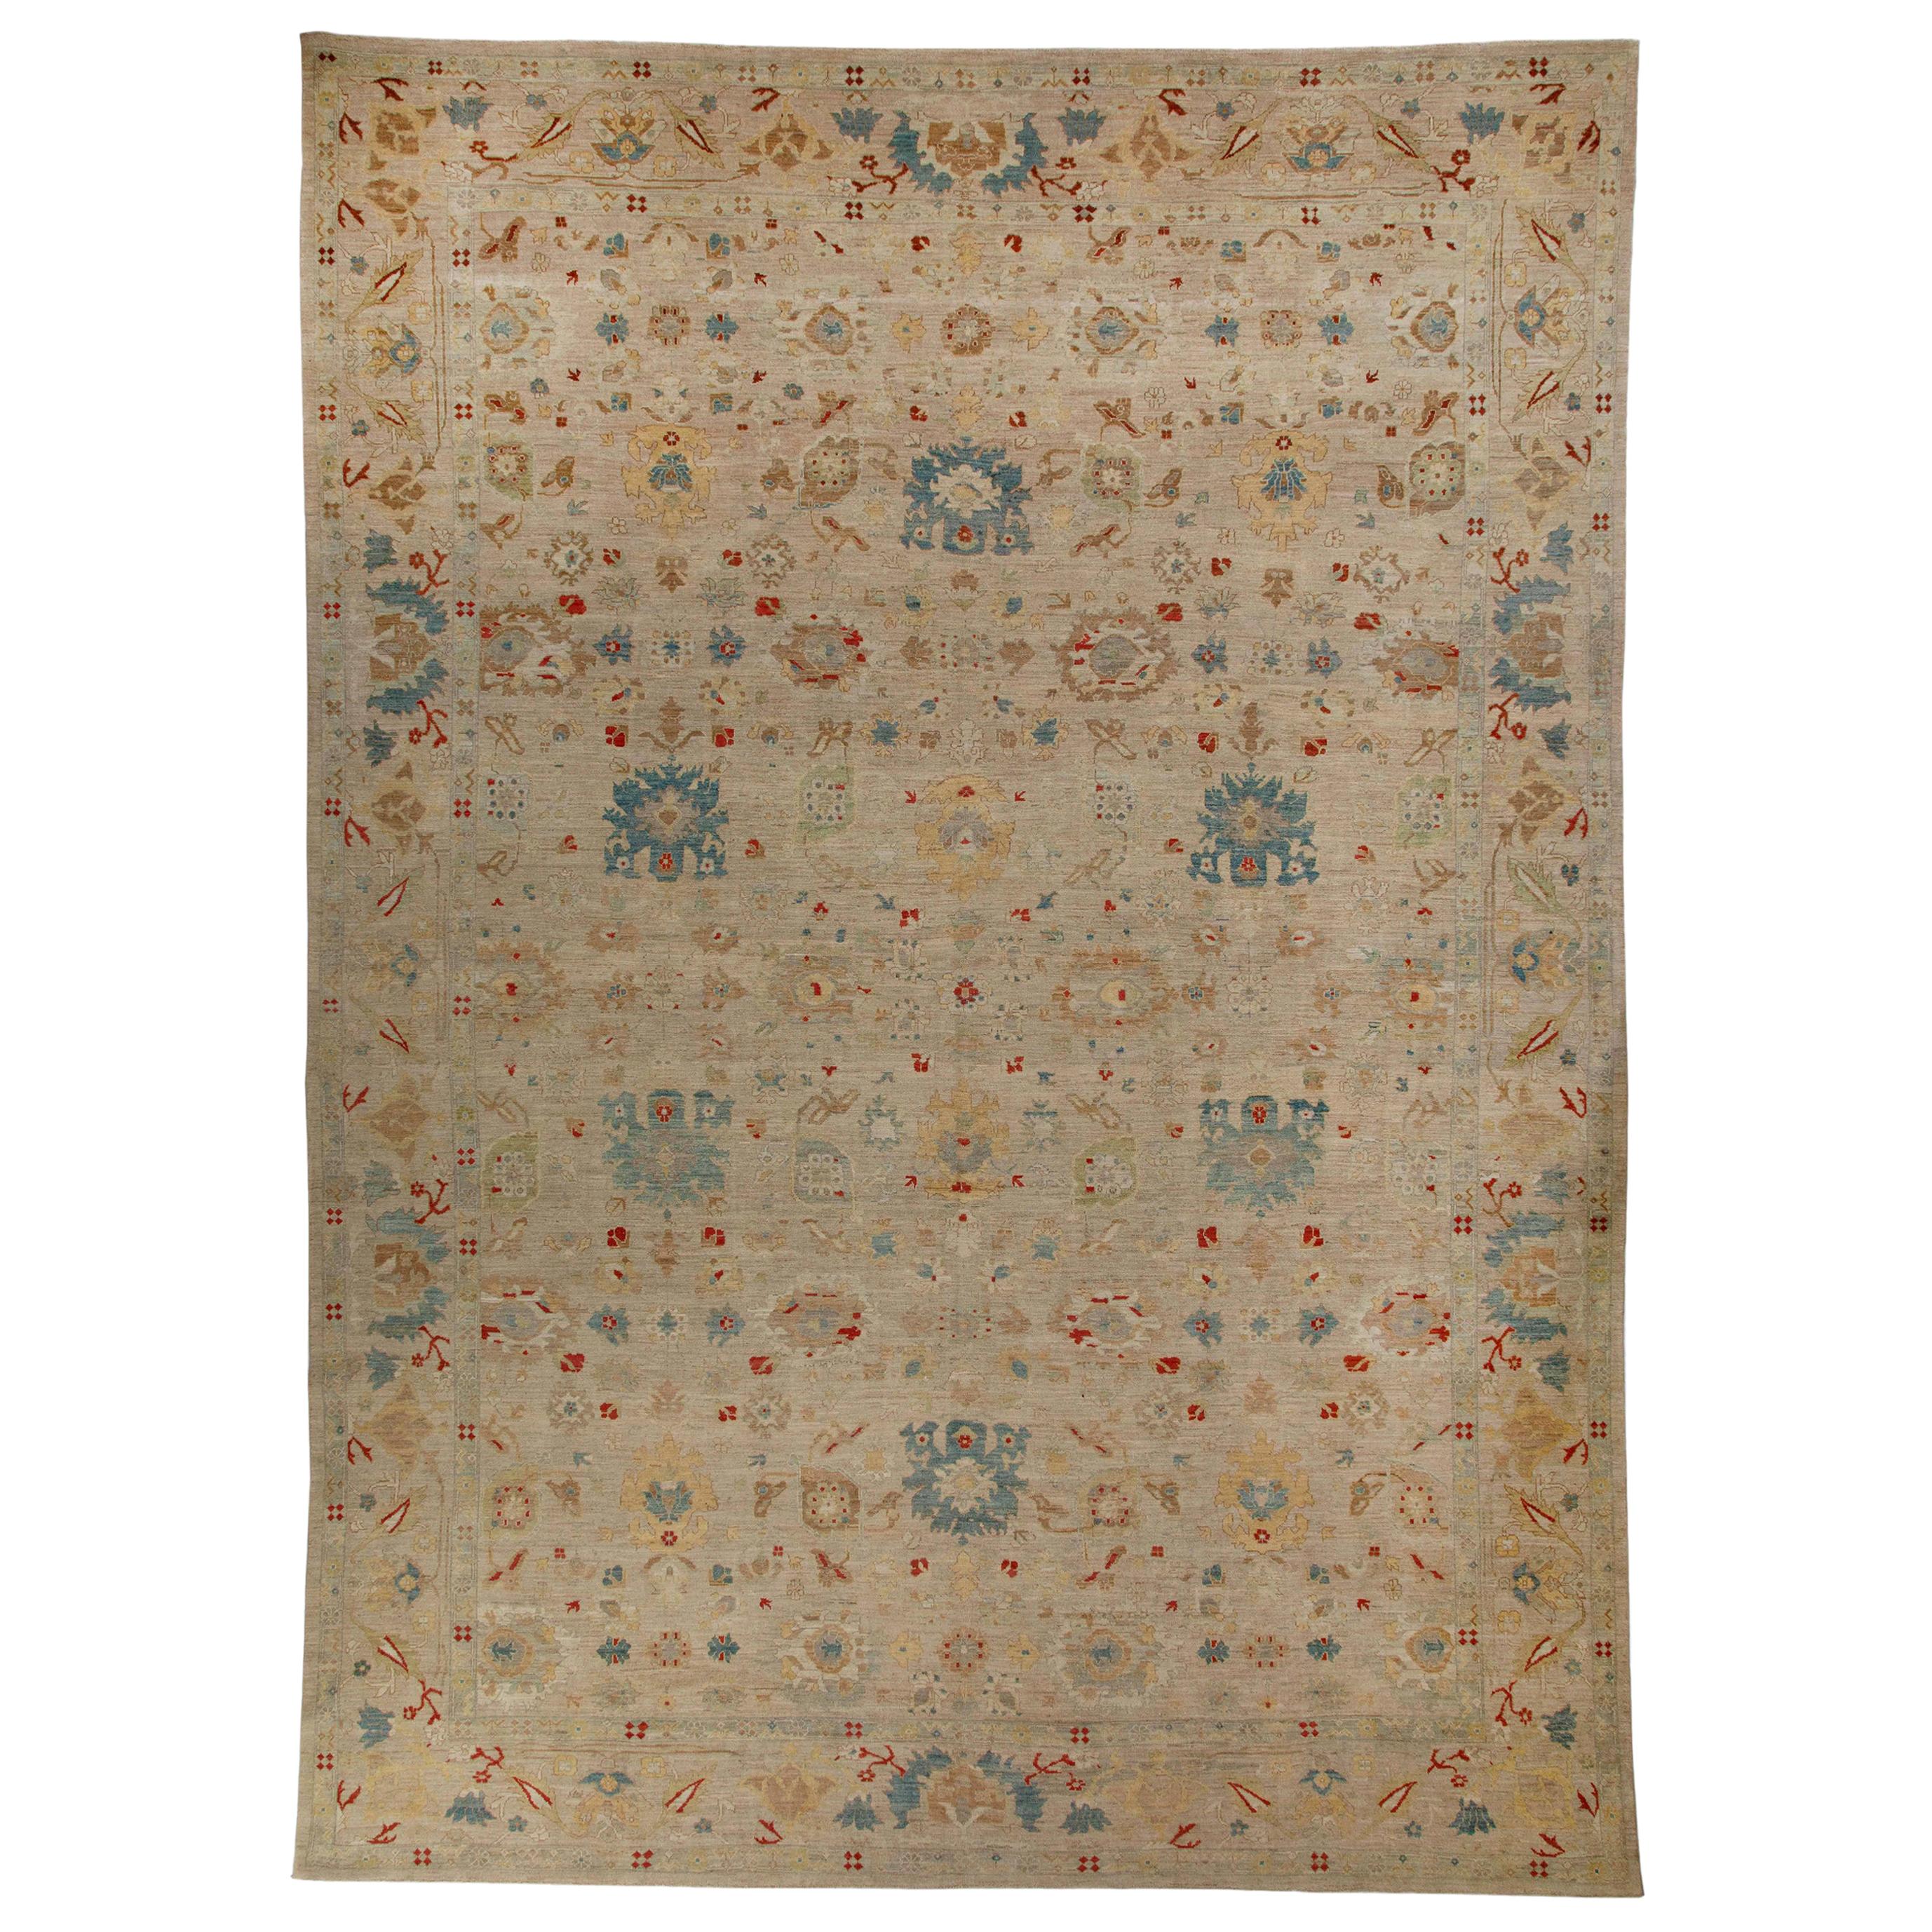 Sultanabad Style Turkish Rug with Beige Field and Multicolored Flower Patterns